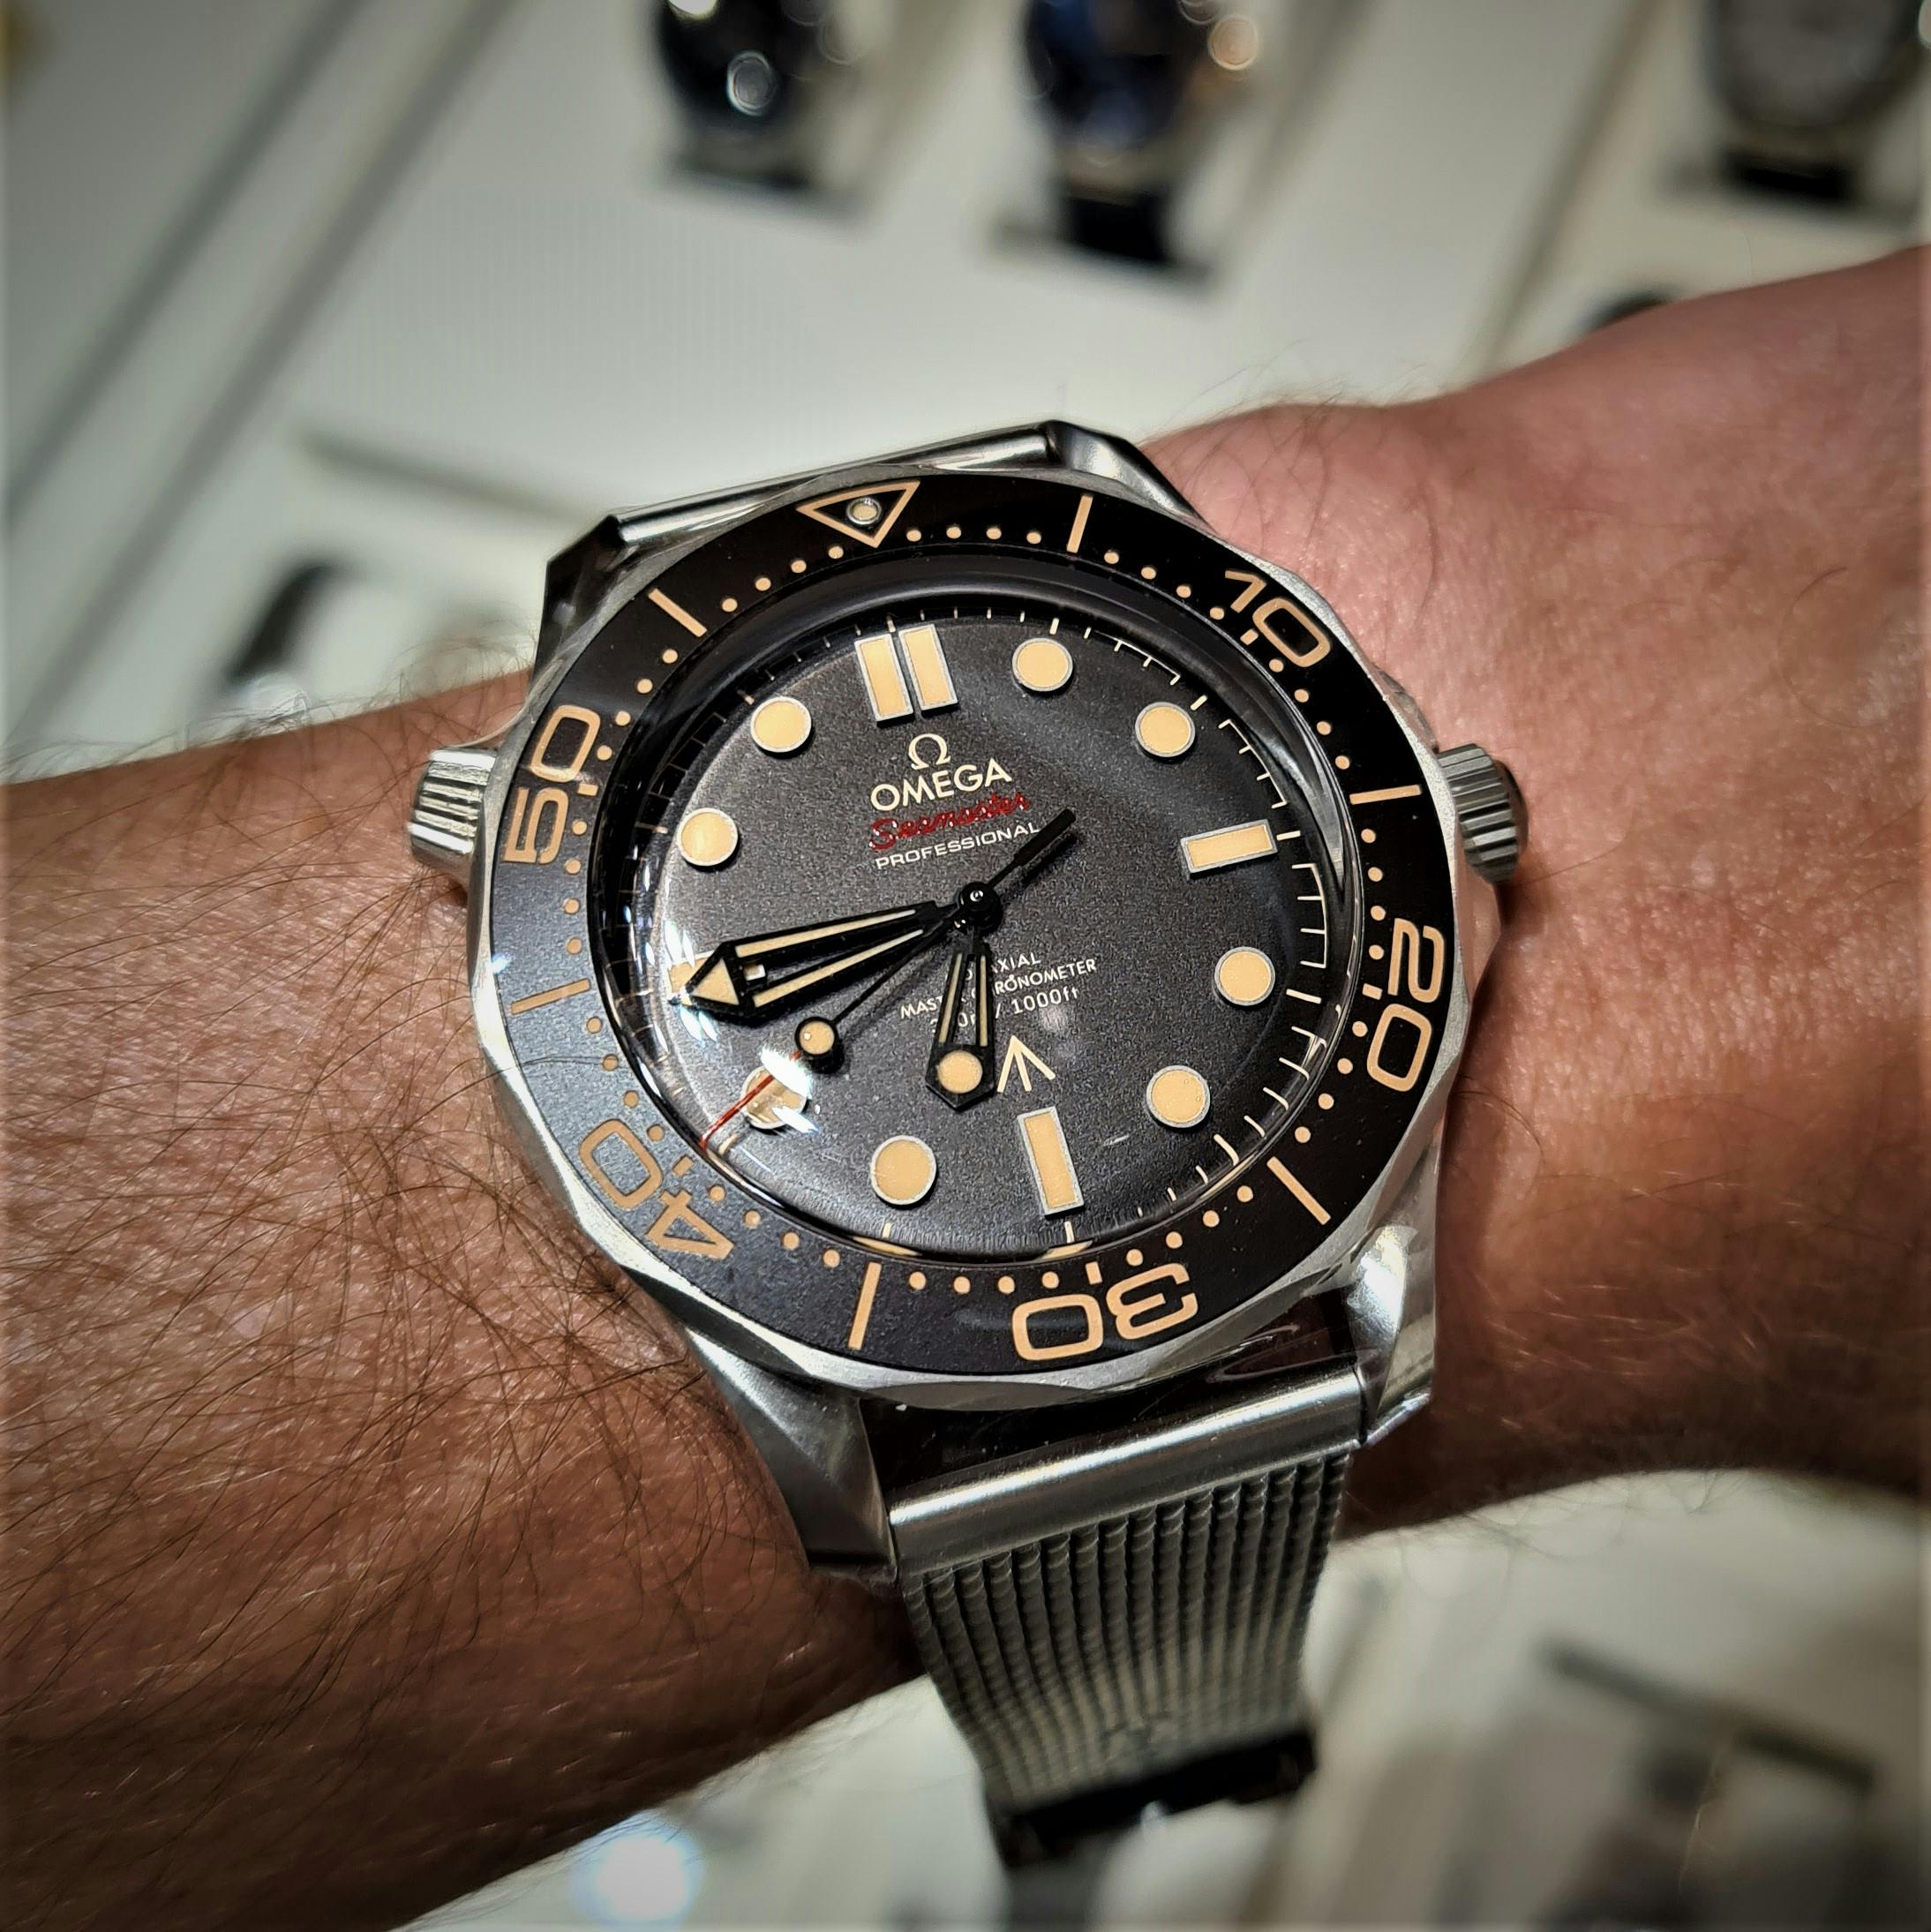 Large Omega wristwatch with black dial and bezel, faded yellow lume plots and see through hands with titanium case and strap